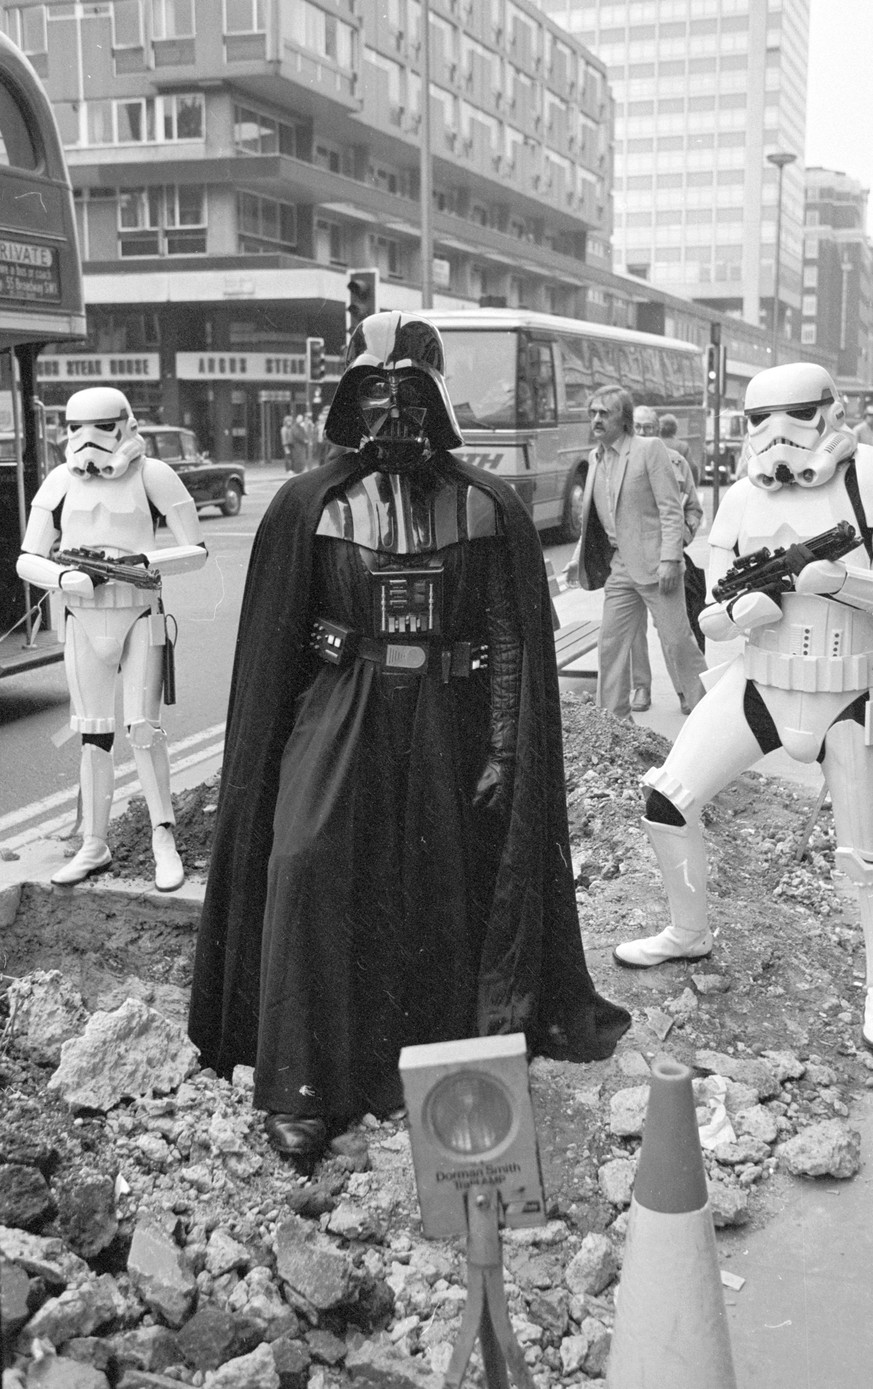 Darth Vader
31st March 1980: Darth Vader and two stormtroopers from the film &#039;Star Wars&#039; stand menacingly over some road works in London&#039;s Oxford Street. (Photo by Central Press/Getty I ...